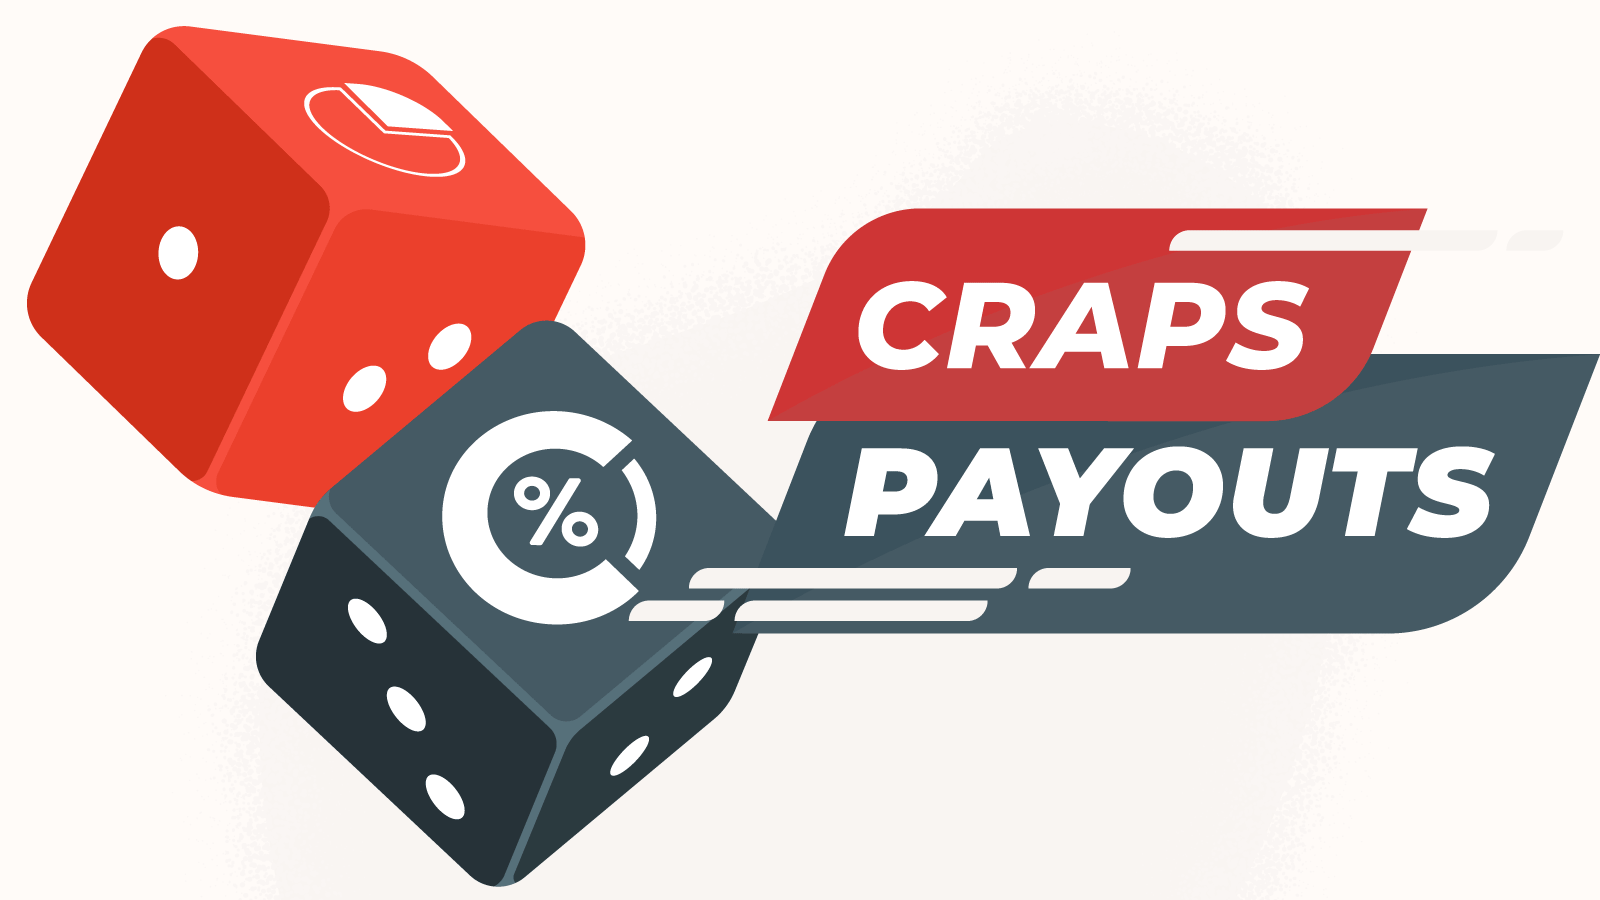 Craps Payouts and Odds Explained